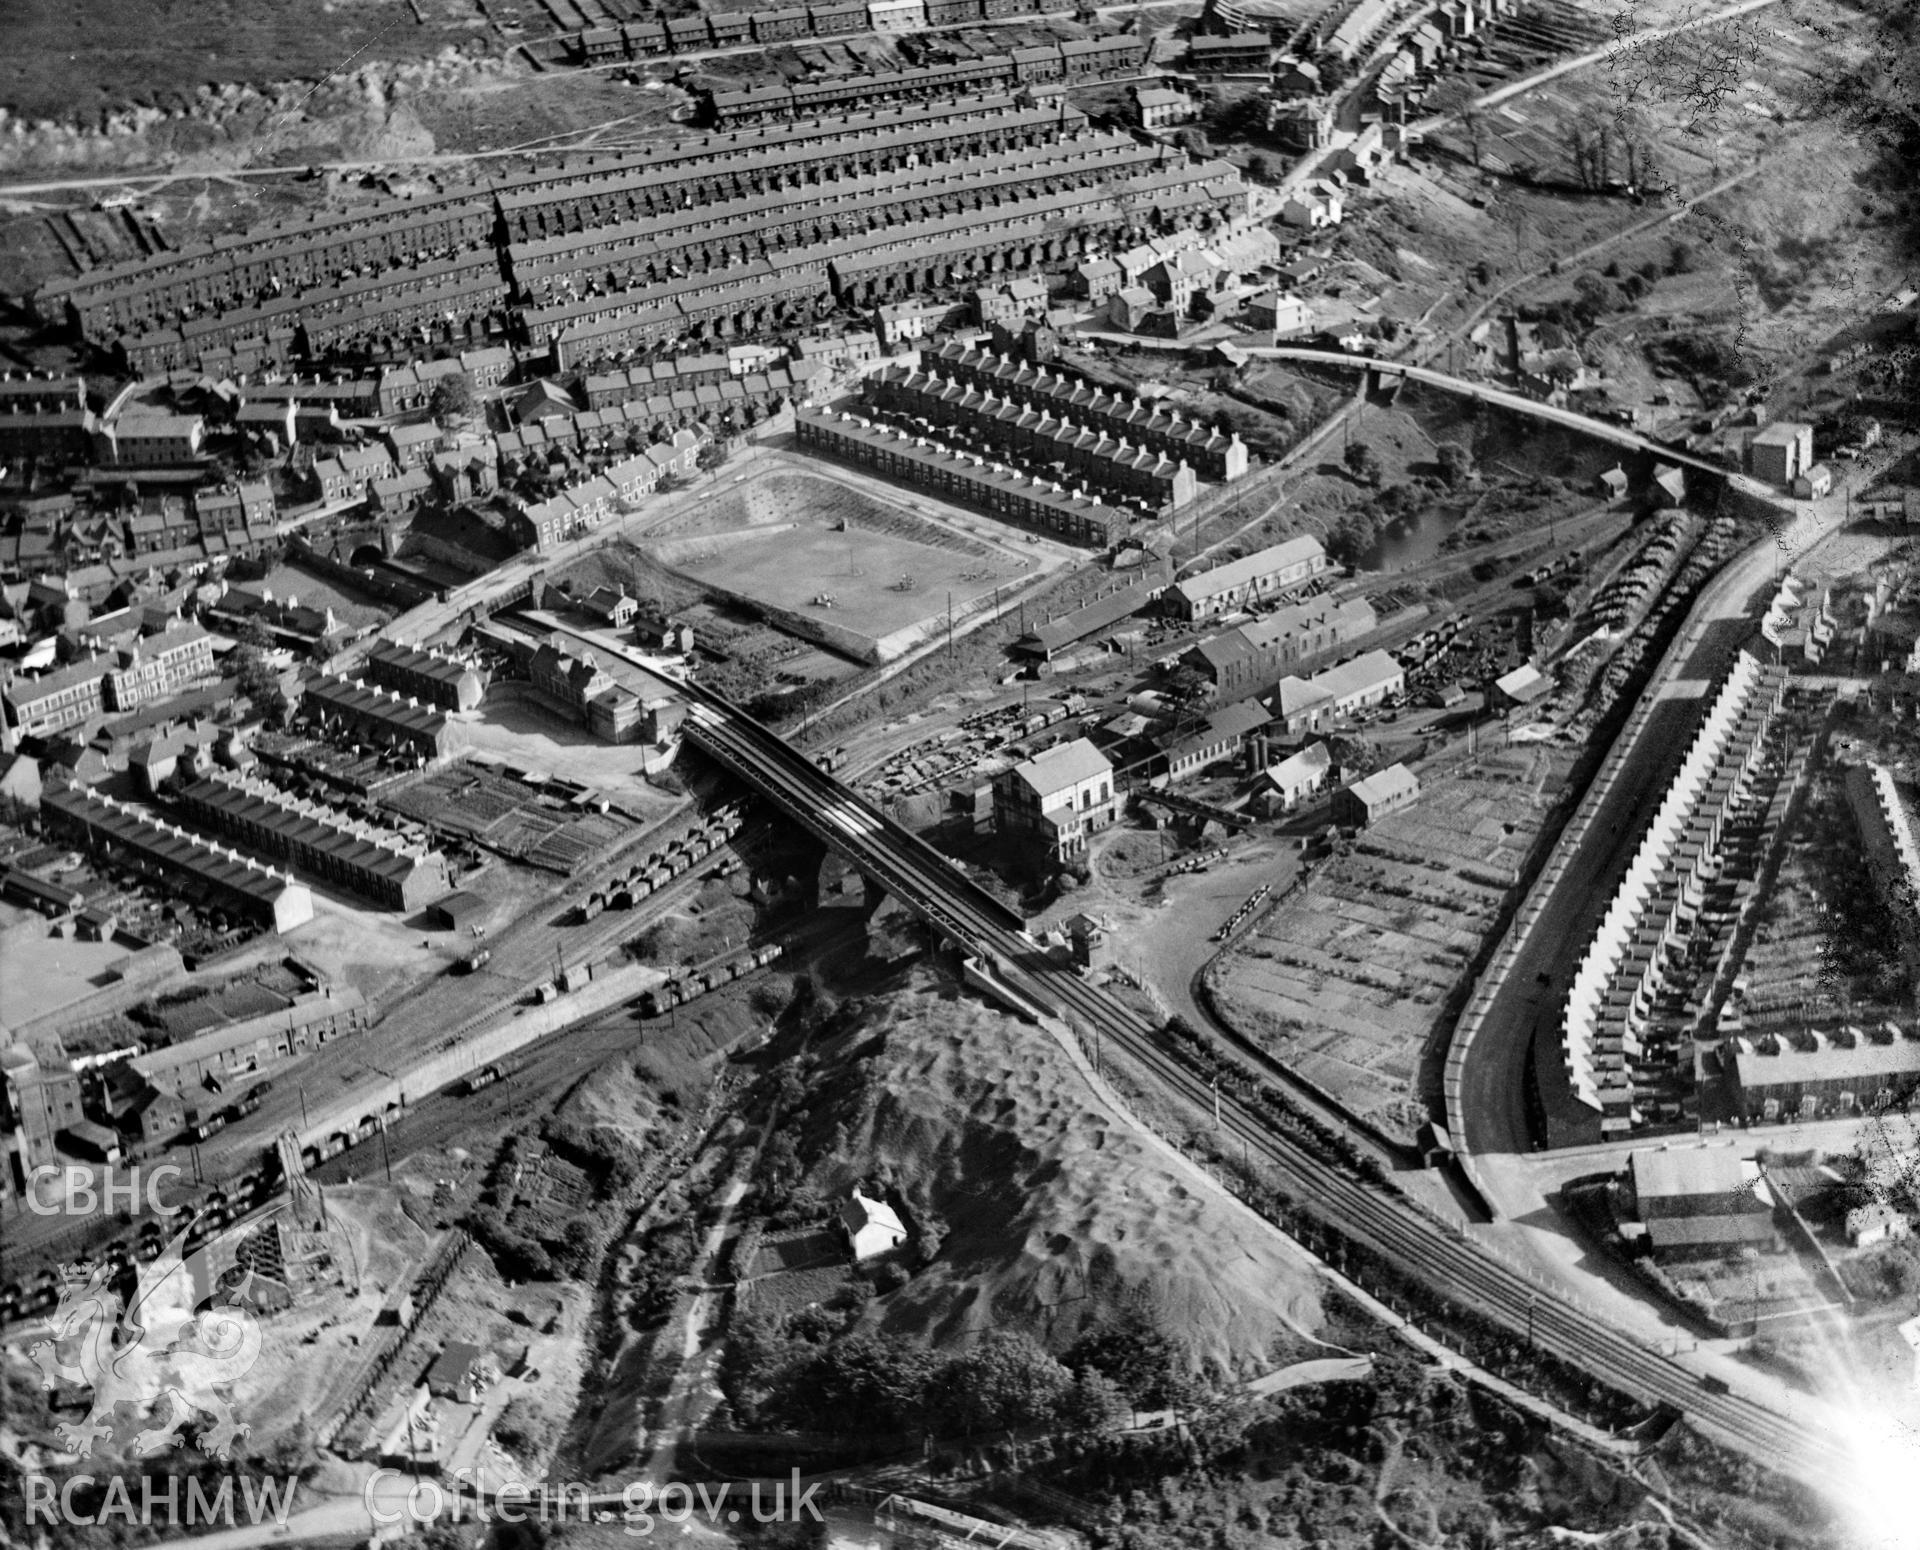 View of Maritime Colliery, Pontypridd, looking from north, oblique aerial view. 5?x4? black and white glass plate negative.